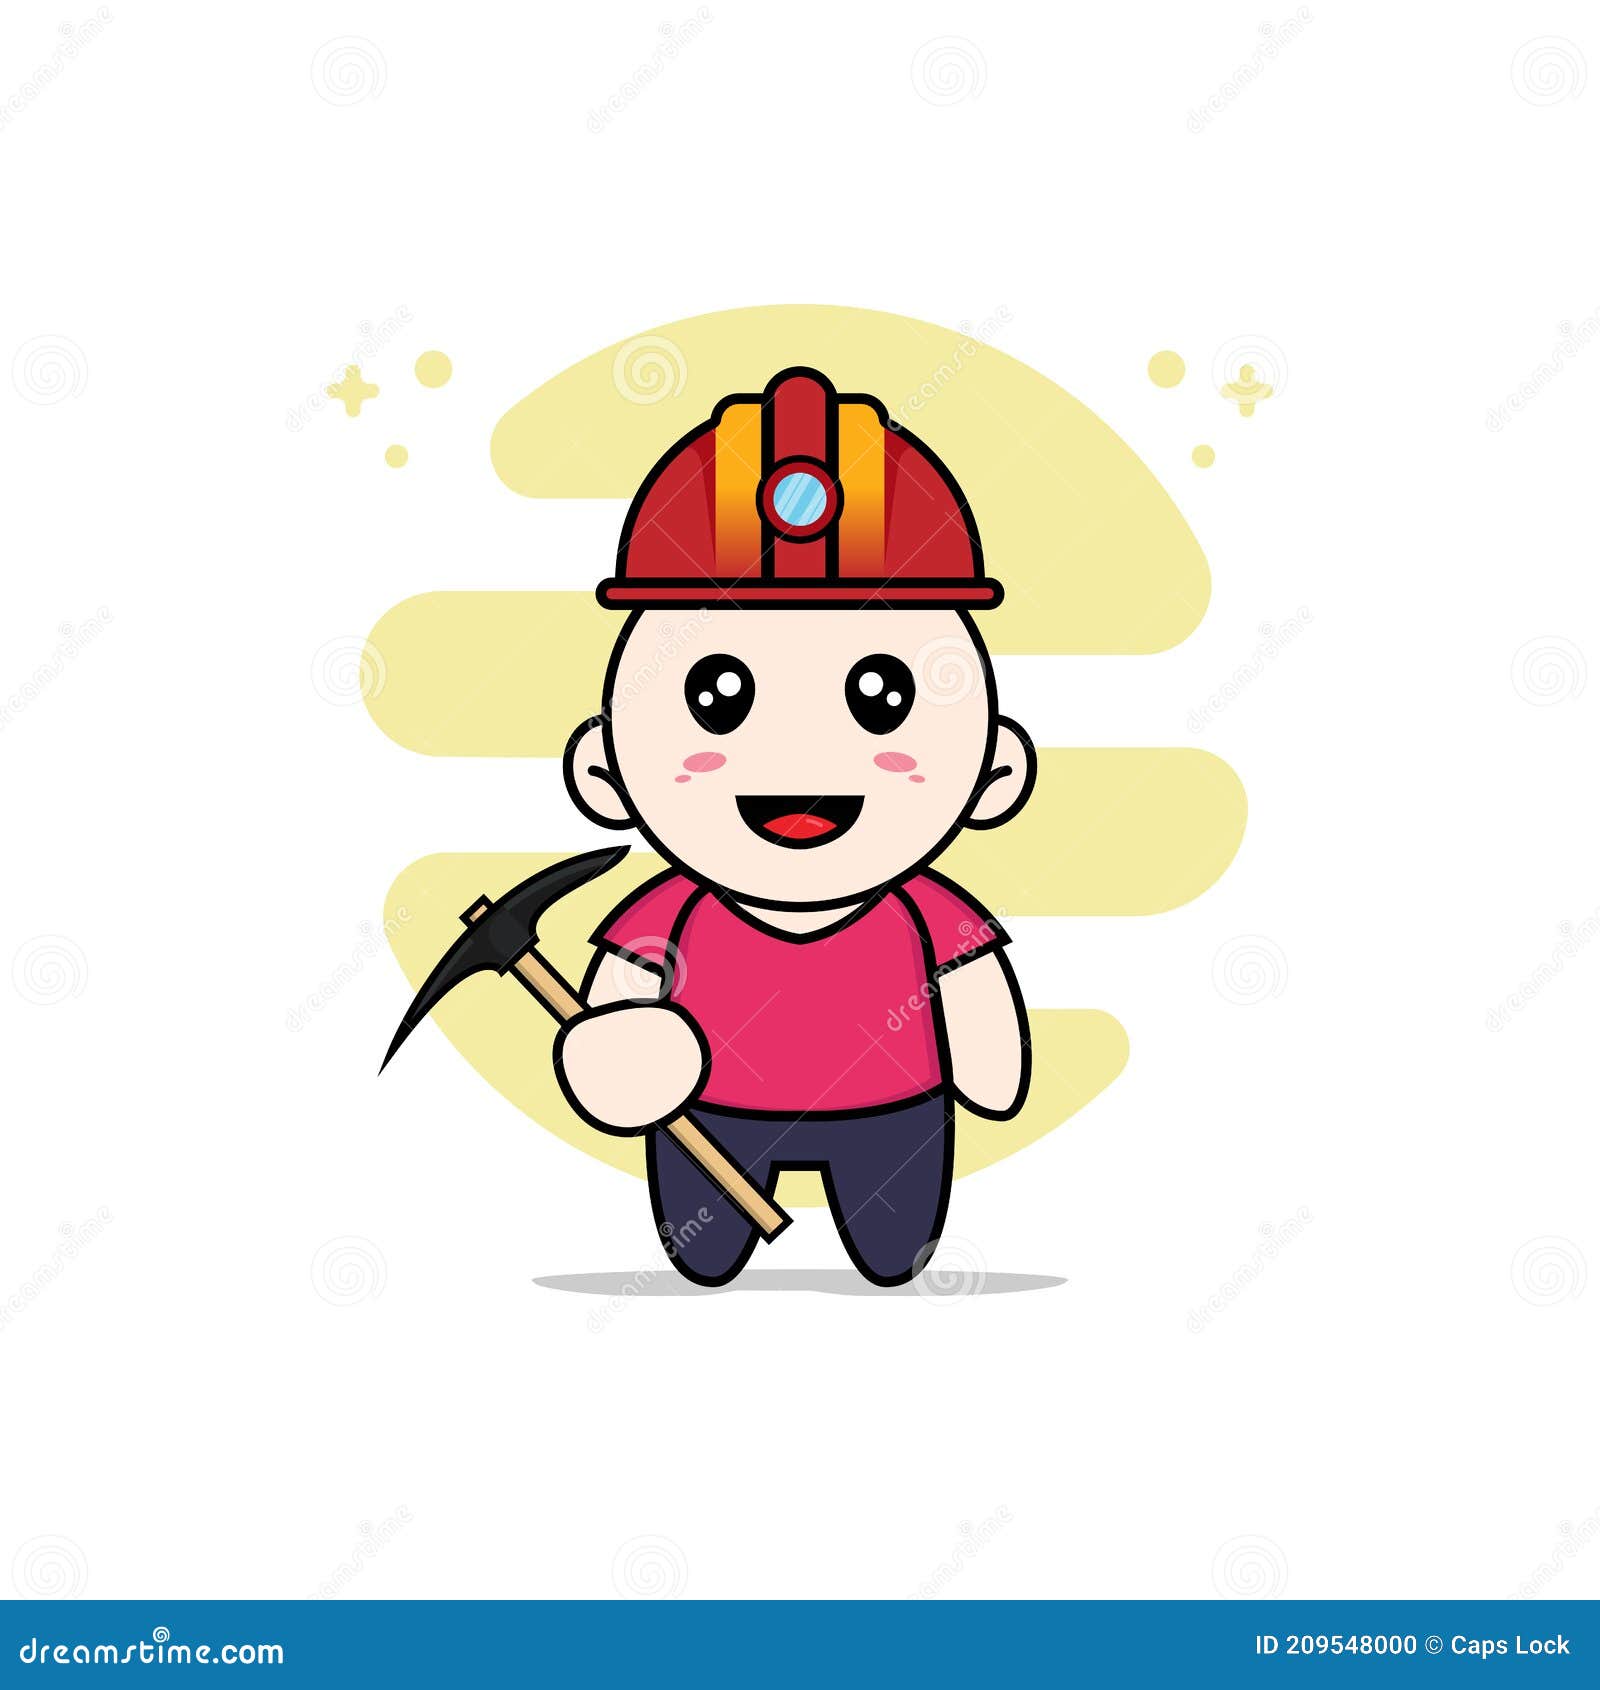 Cute Kids Character Wearing Miners Costume Stock Vector - Illustration ...